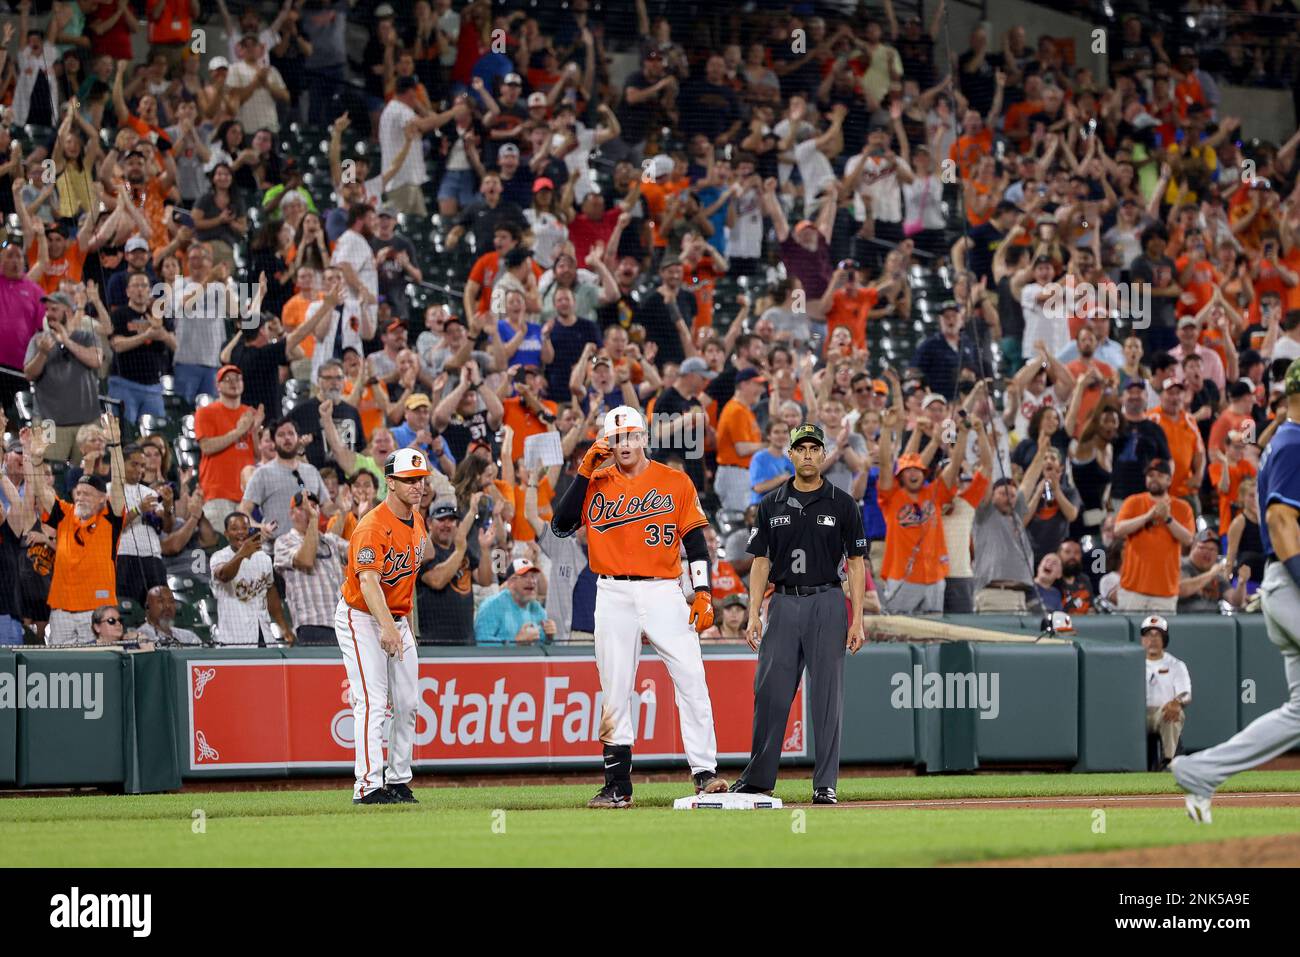 BALTIMORE, MD - MAY 21: Fans cheer as Adley Rutschman (35) of the Baltimore  Orioles has his first MLB hit, which is a triple during a game against the  Tampa Bay Rays